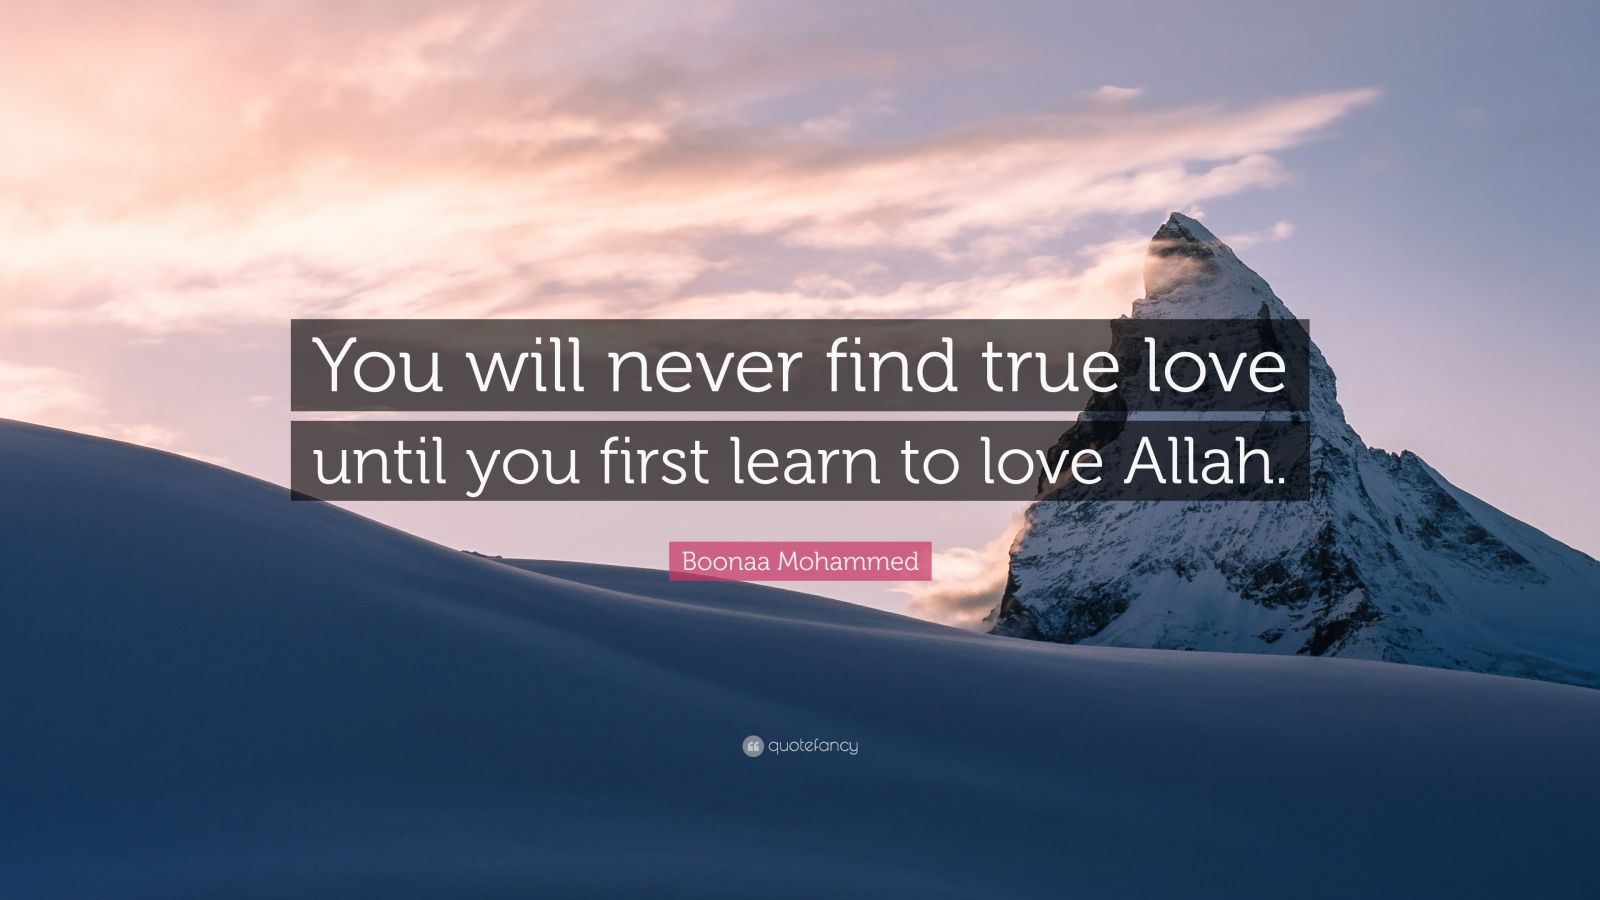 Boonaa Mohammed Quote: “You will never find true love until you first learn  to love Allah.”